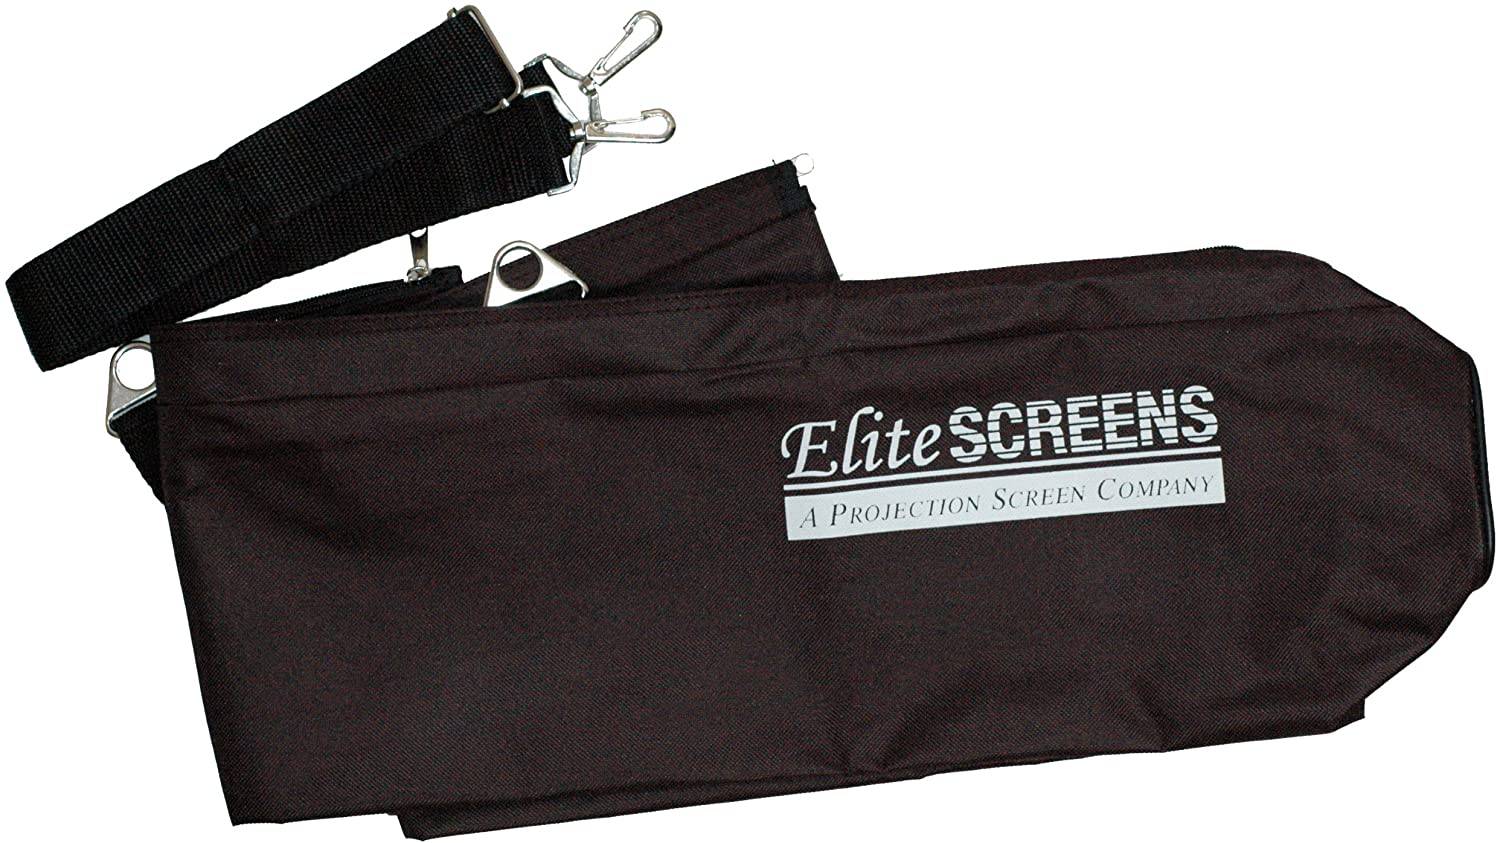 Elite Screens Tripod Screen Carrying Bag for Tripod Series Models: T99UWS1 and T99NWS1,T99UWS1-PRO